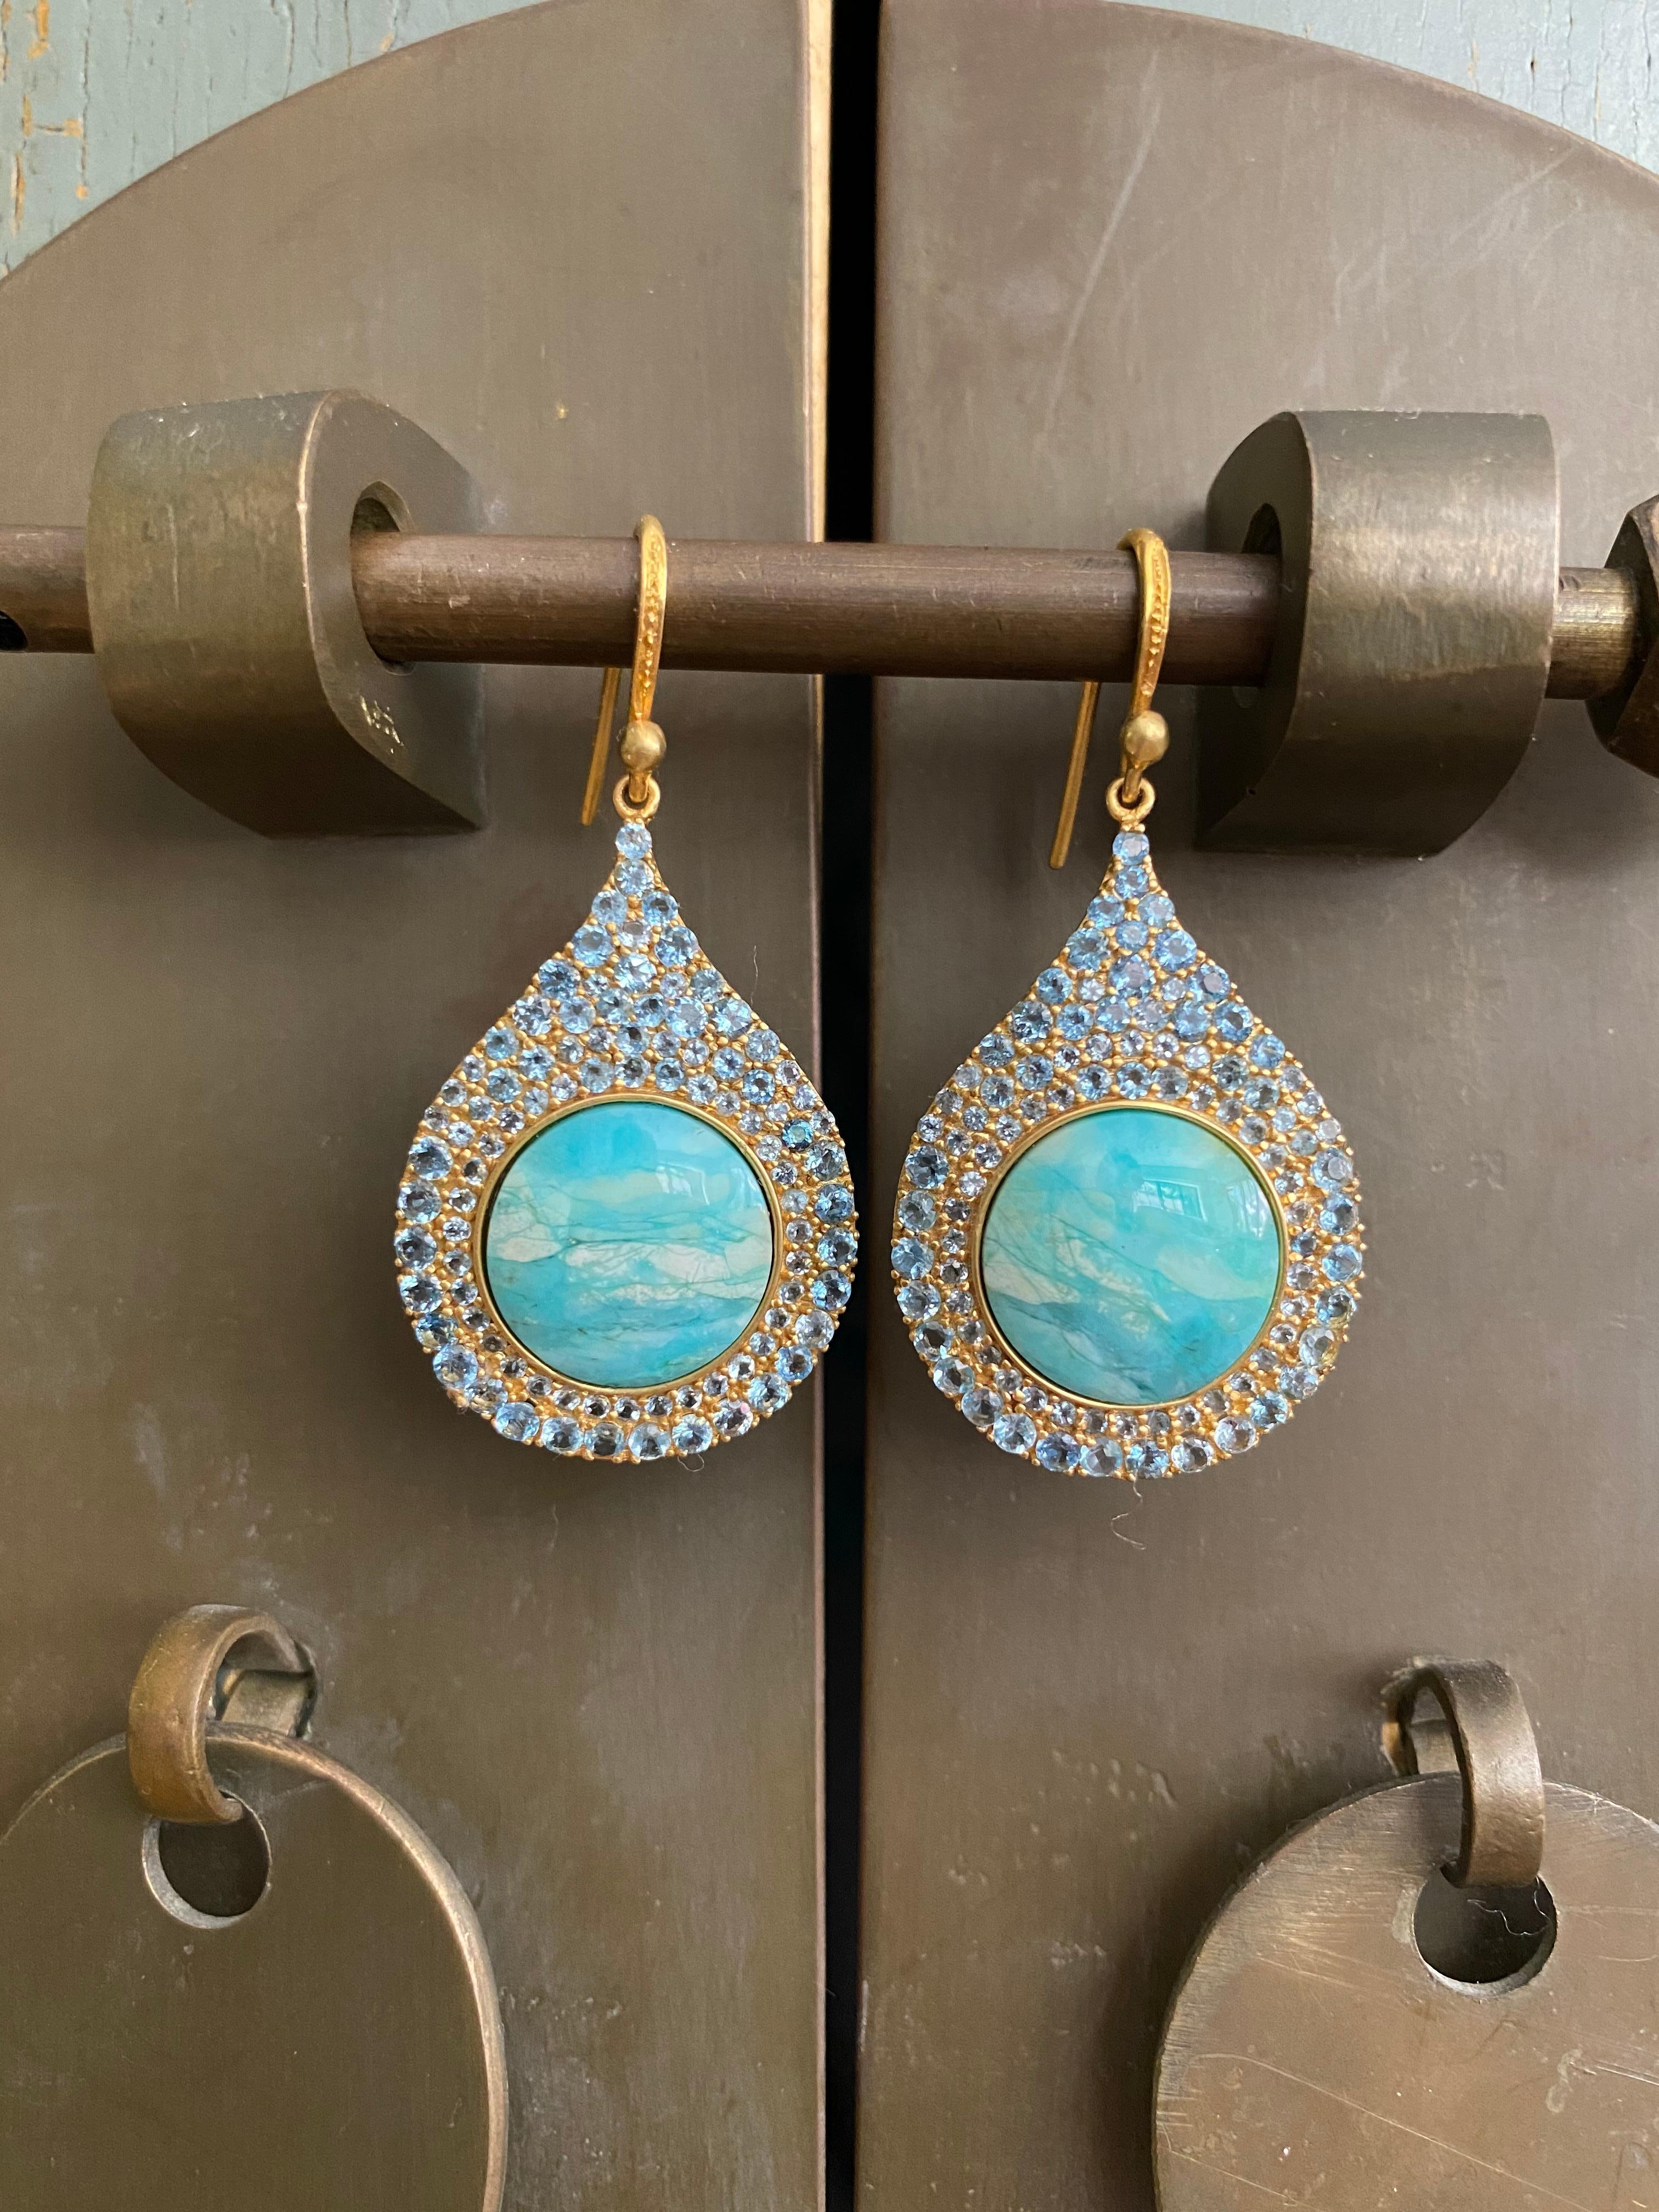 Designed by award winning jewelry designer, Lauren Harper, these earrings have 3.93cts of stunning faceted Aquamarines that surround beautiful ocean-toned Petrified Opalized Wood pieces in a perfect teardrop shape. You will find these earrings match